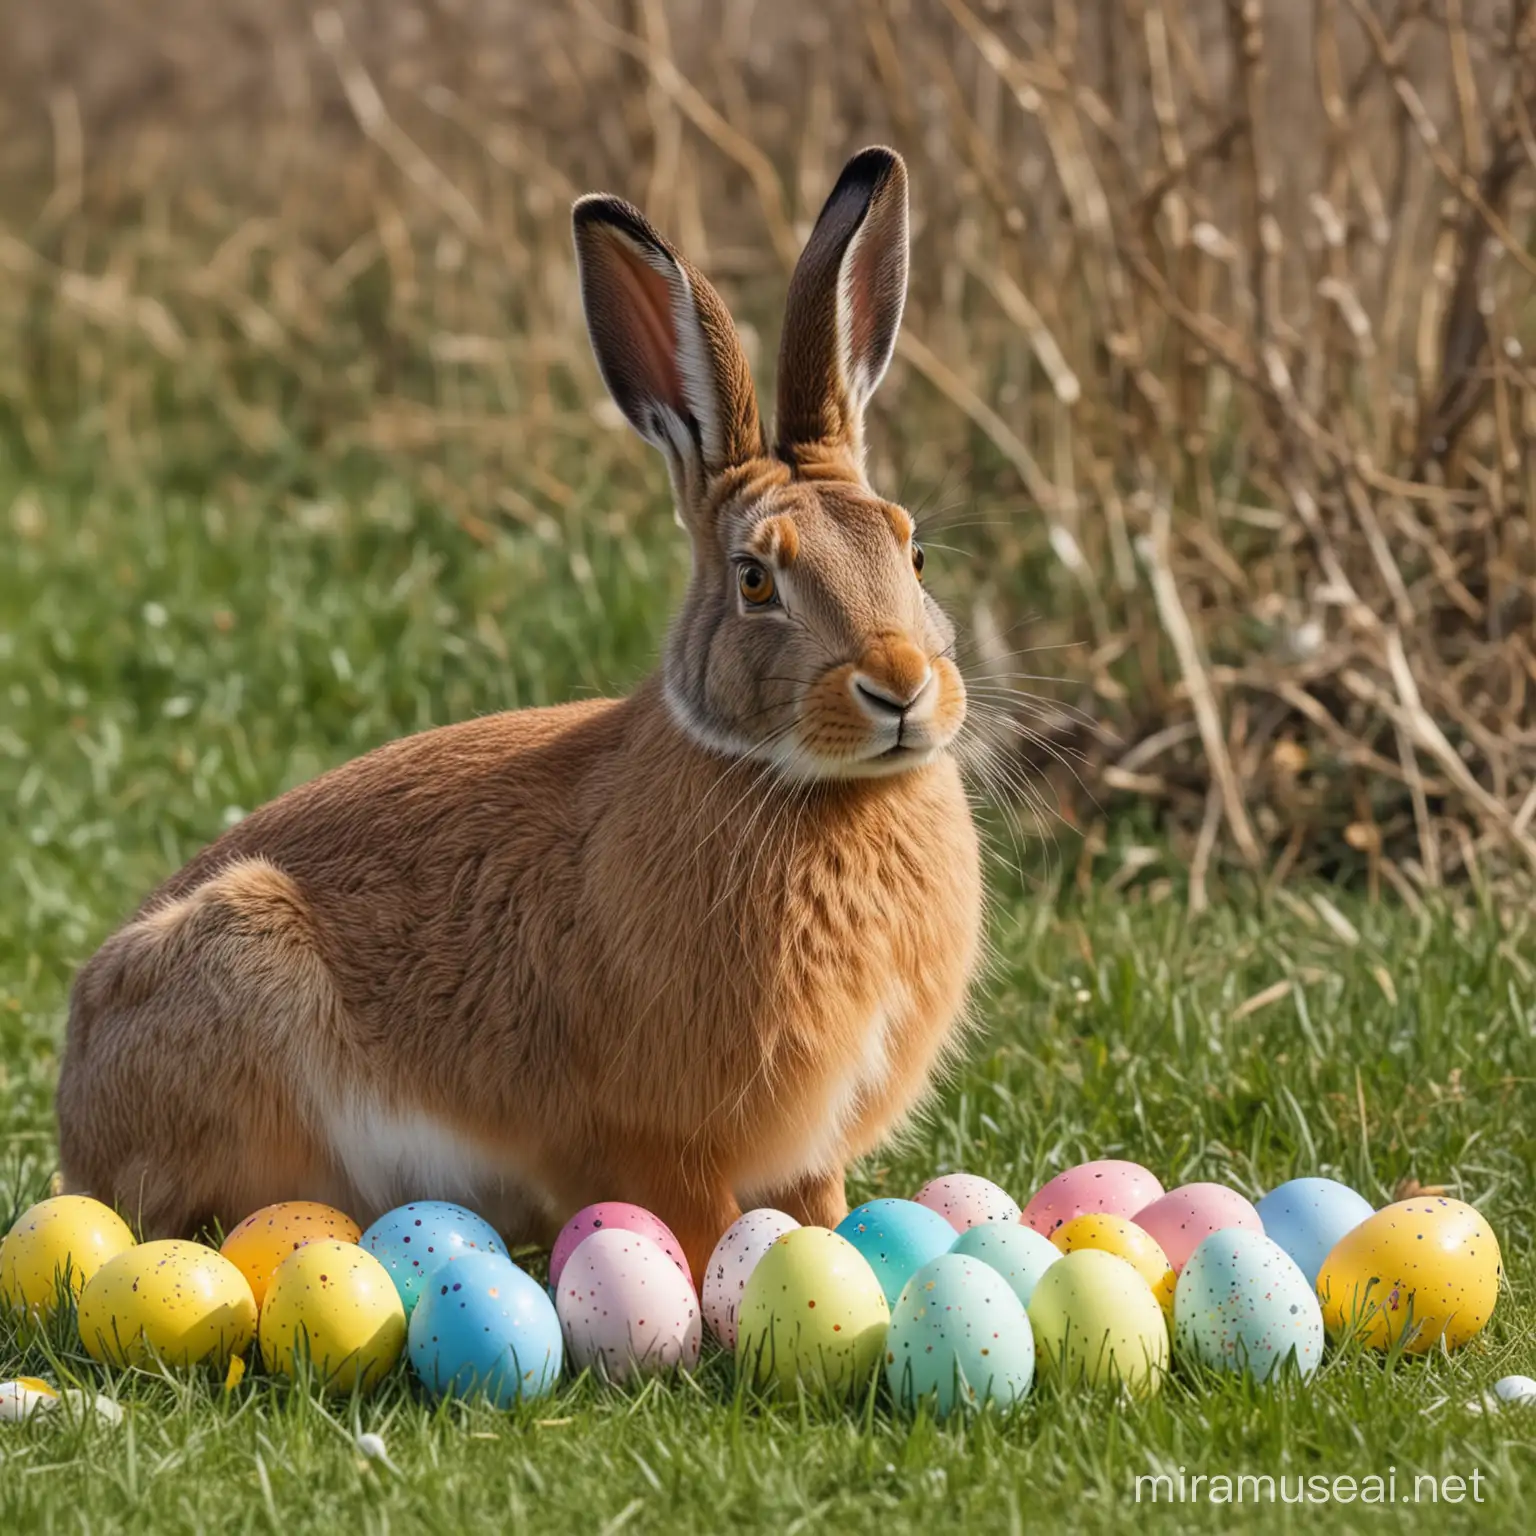 Easter Hare Surrounded by Vibrant Eggs on a Lush Green Lawn